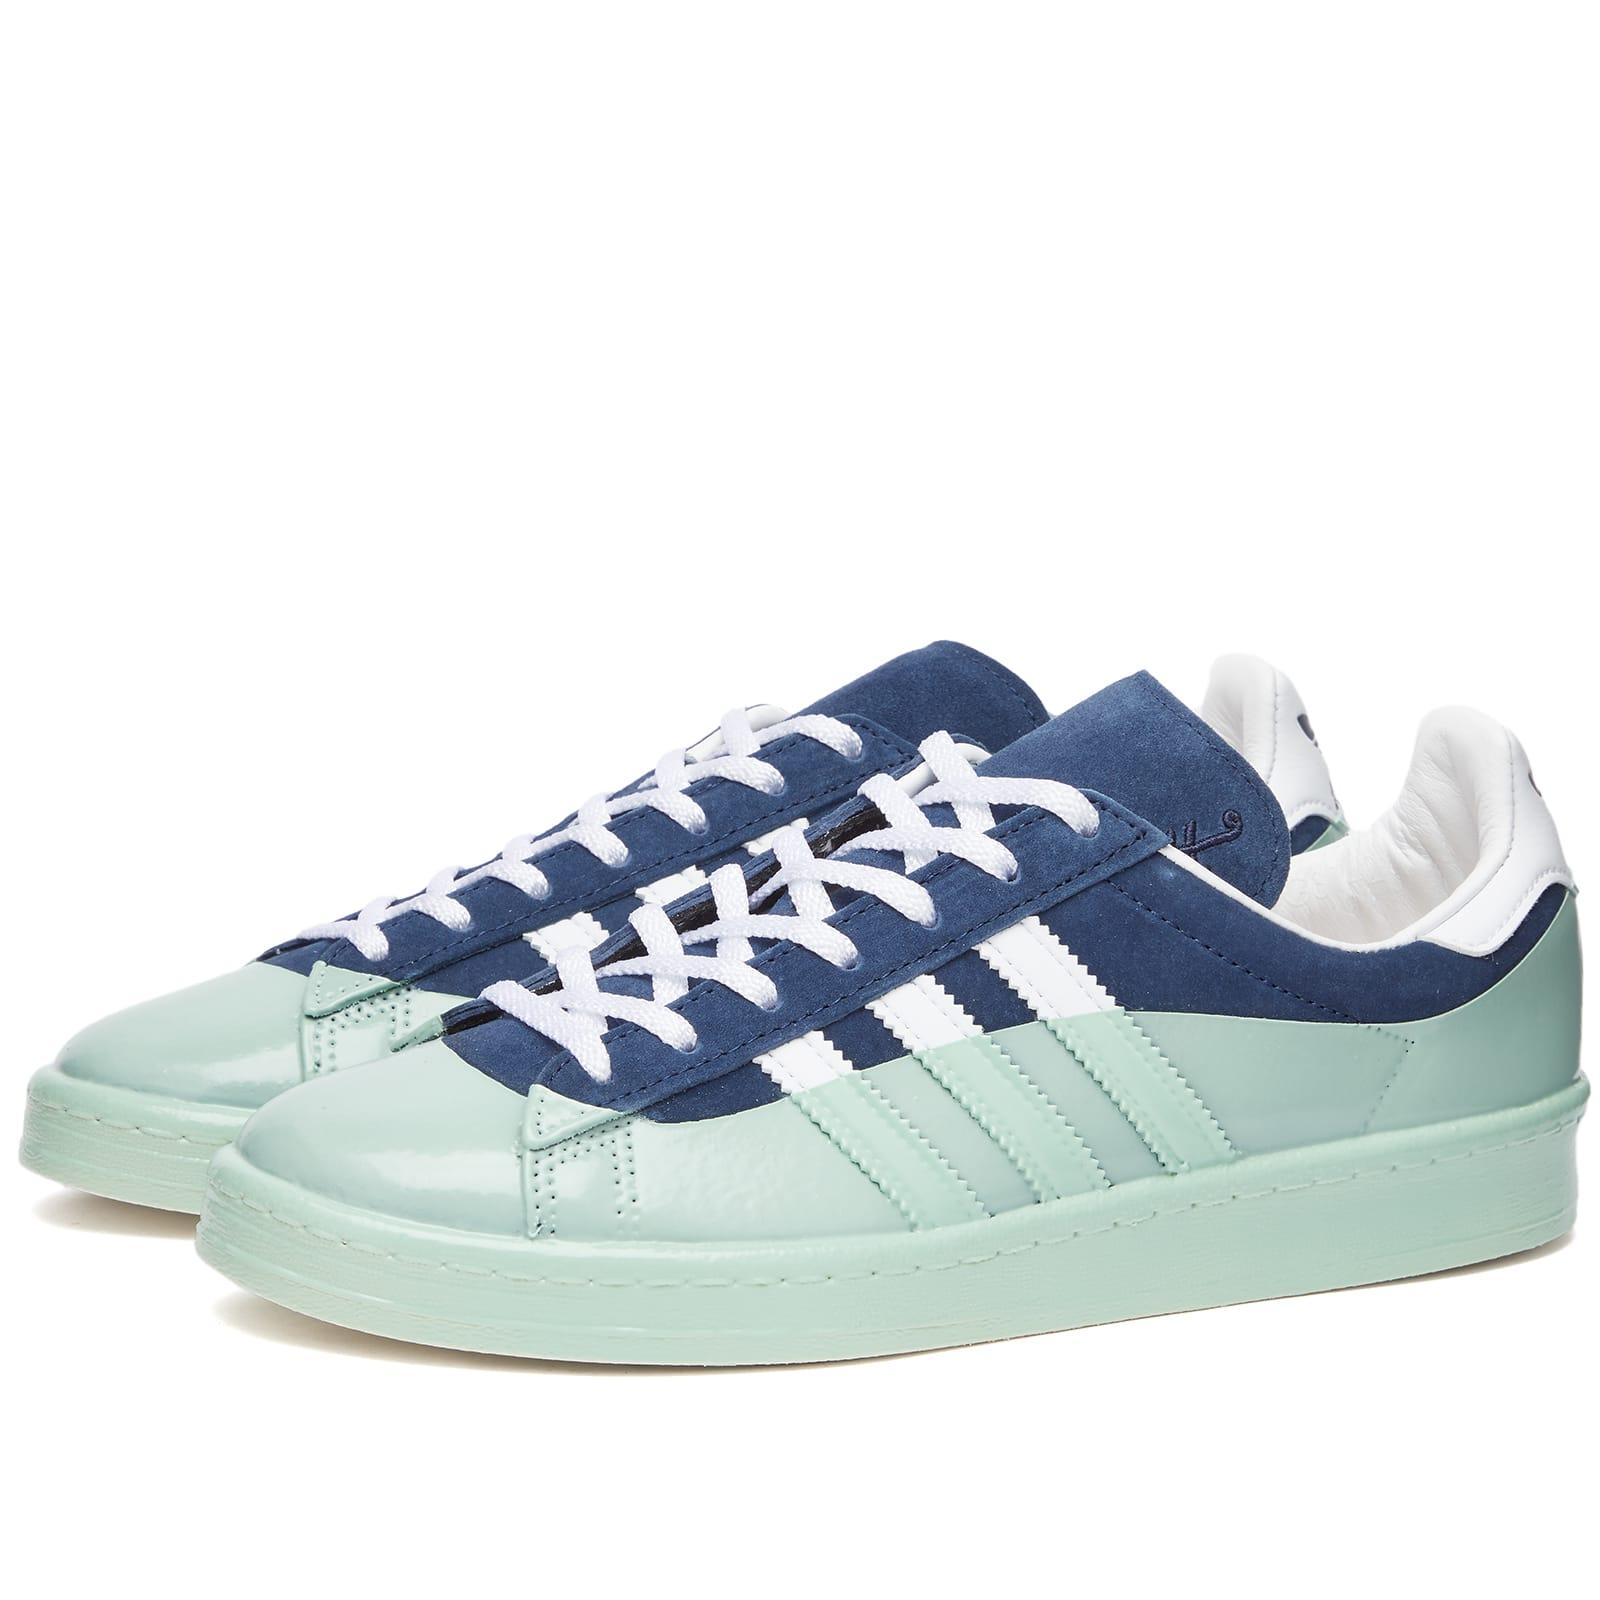 Adidas Campus 80s Navy/White Sneakers 9.5